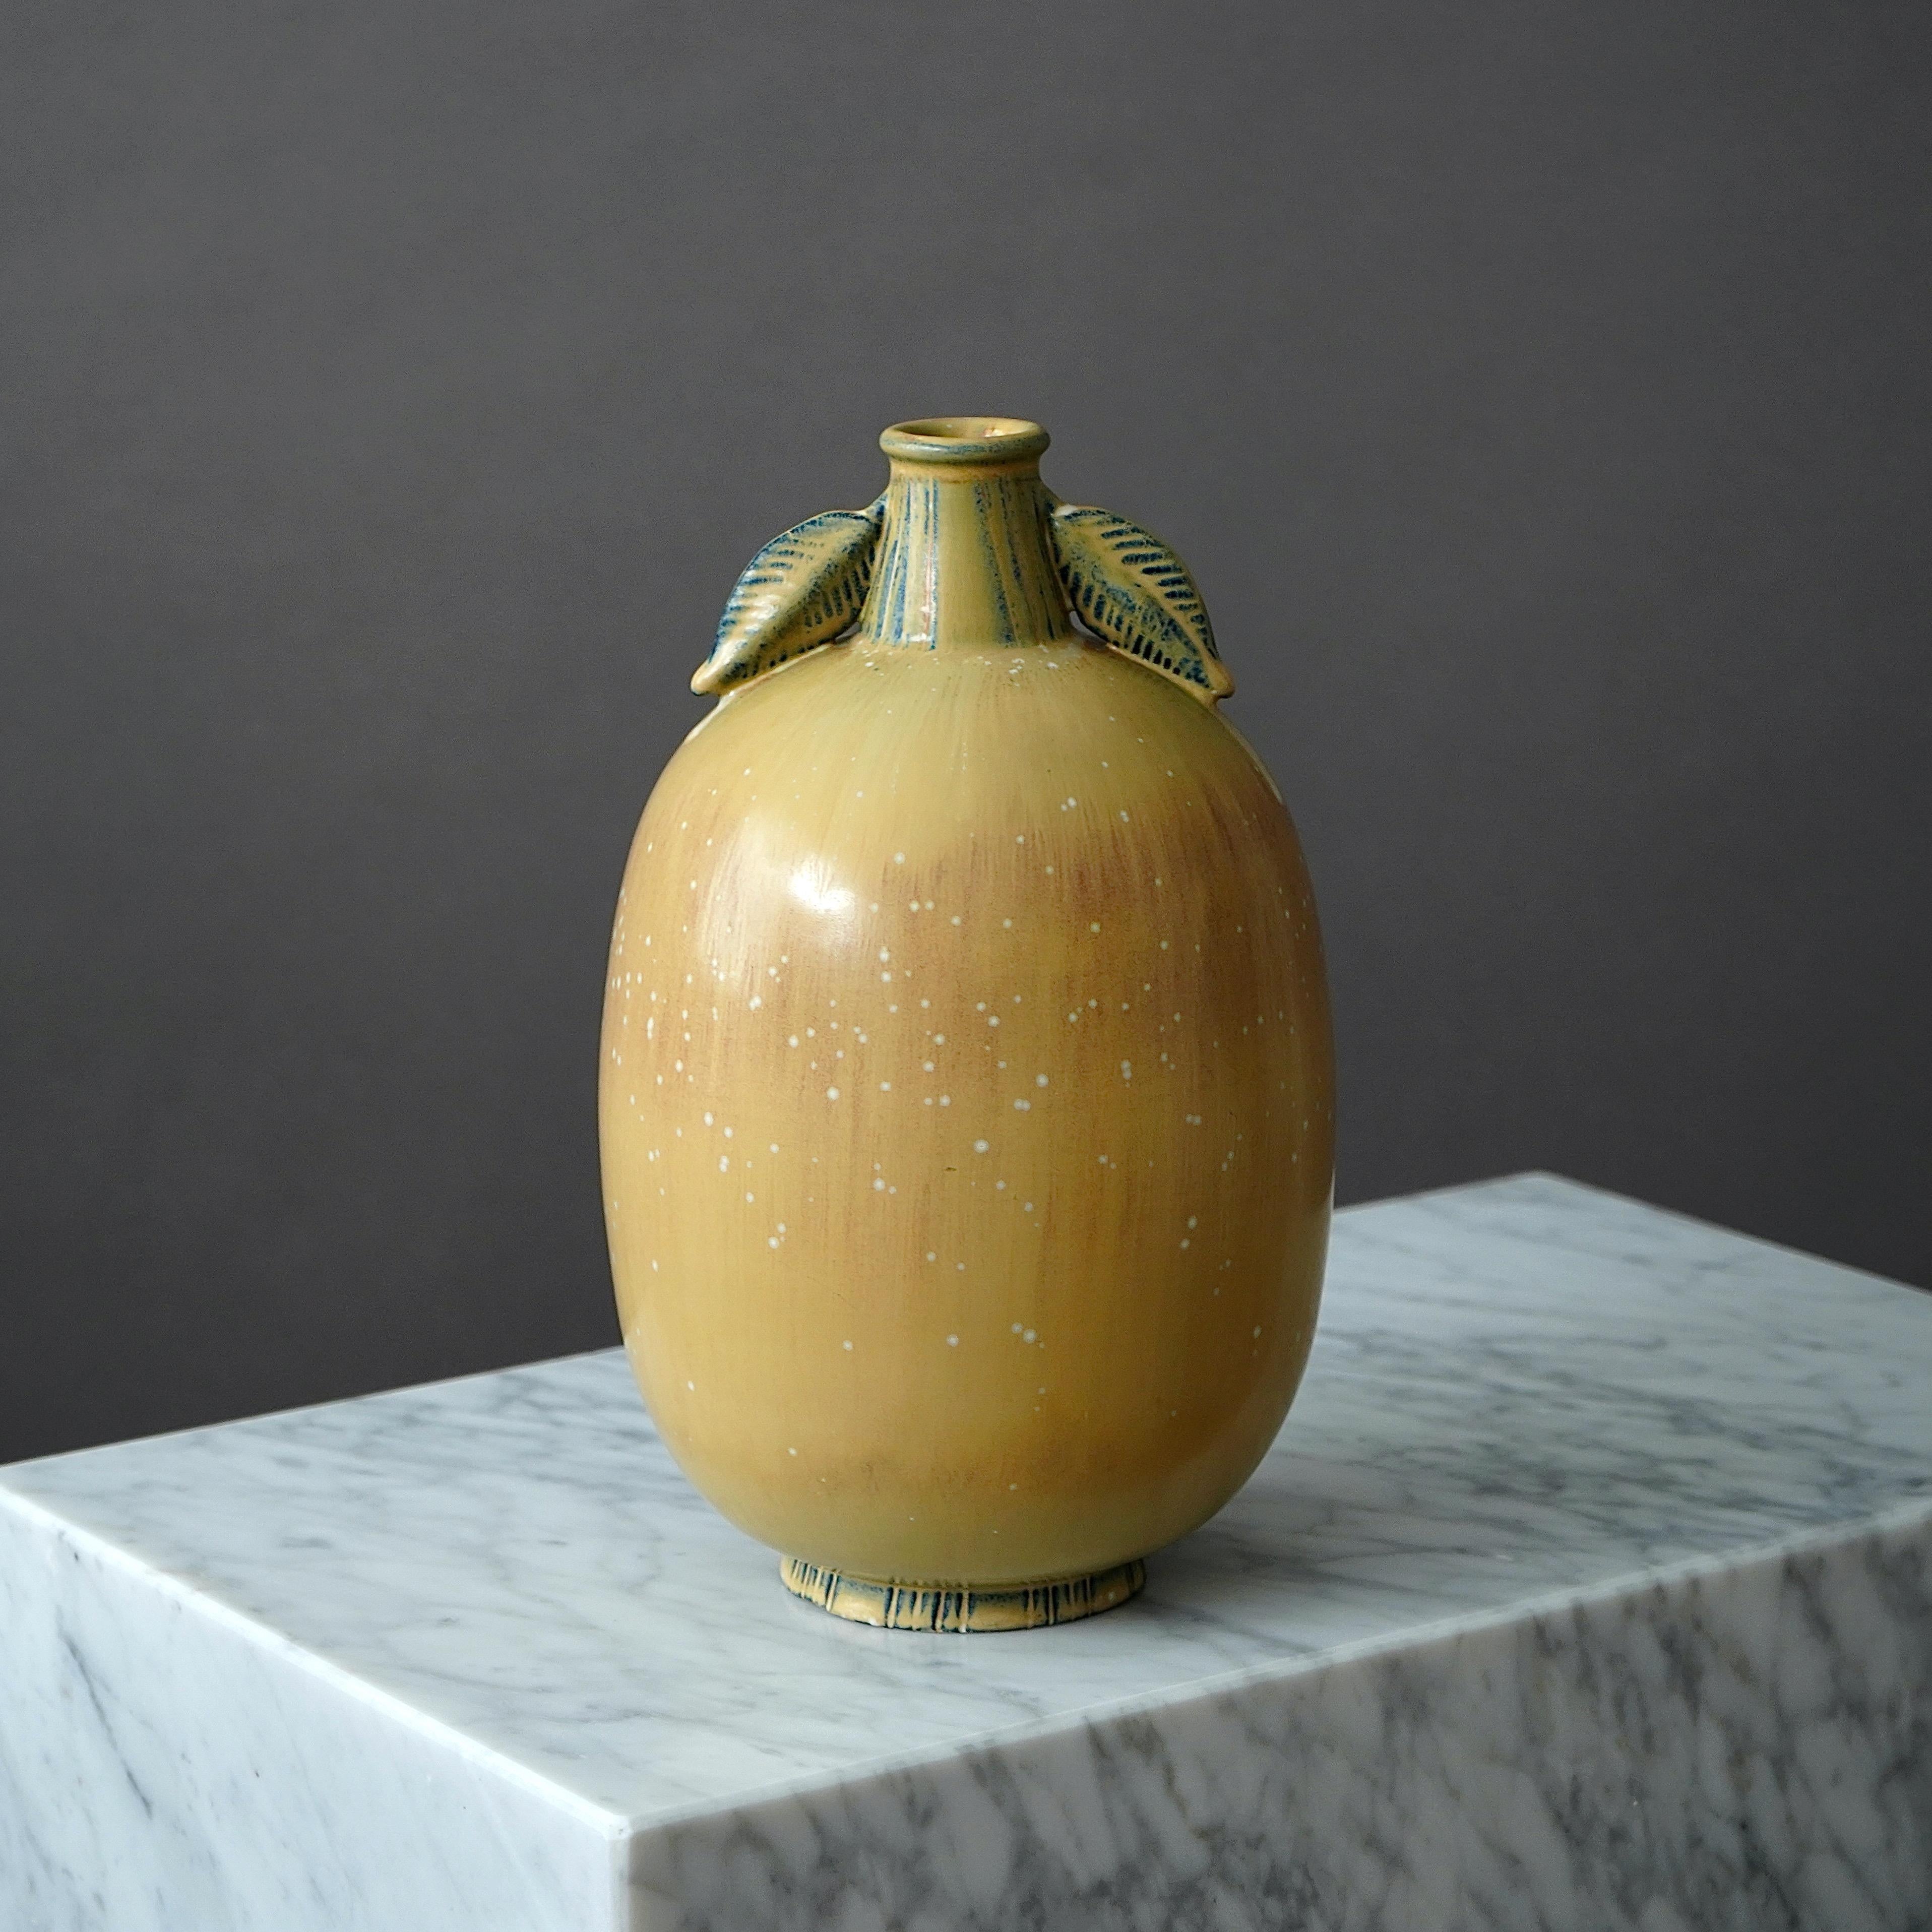 Scandinavian Modern Large Stoneware Vase by Gunnar Nylund for Rorstrand, Sweden, 1940s For Sale